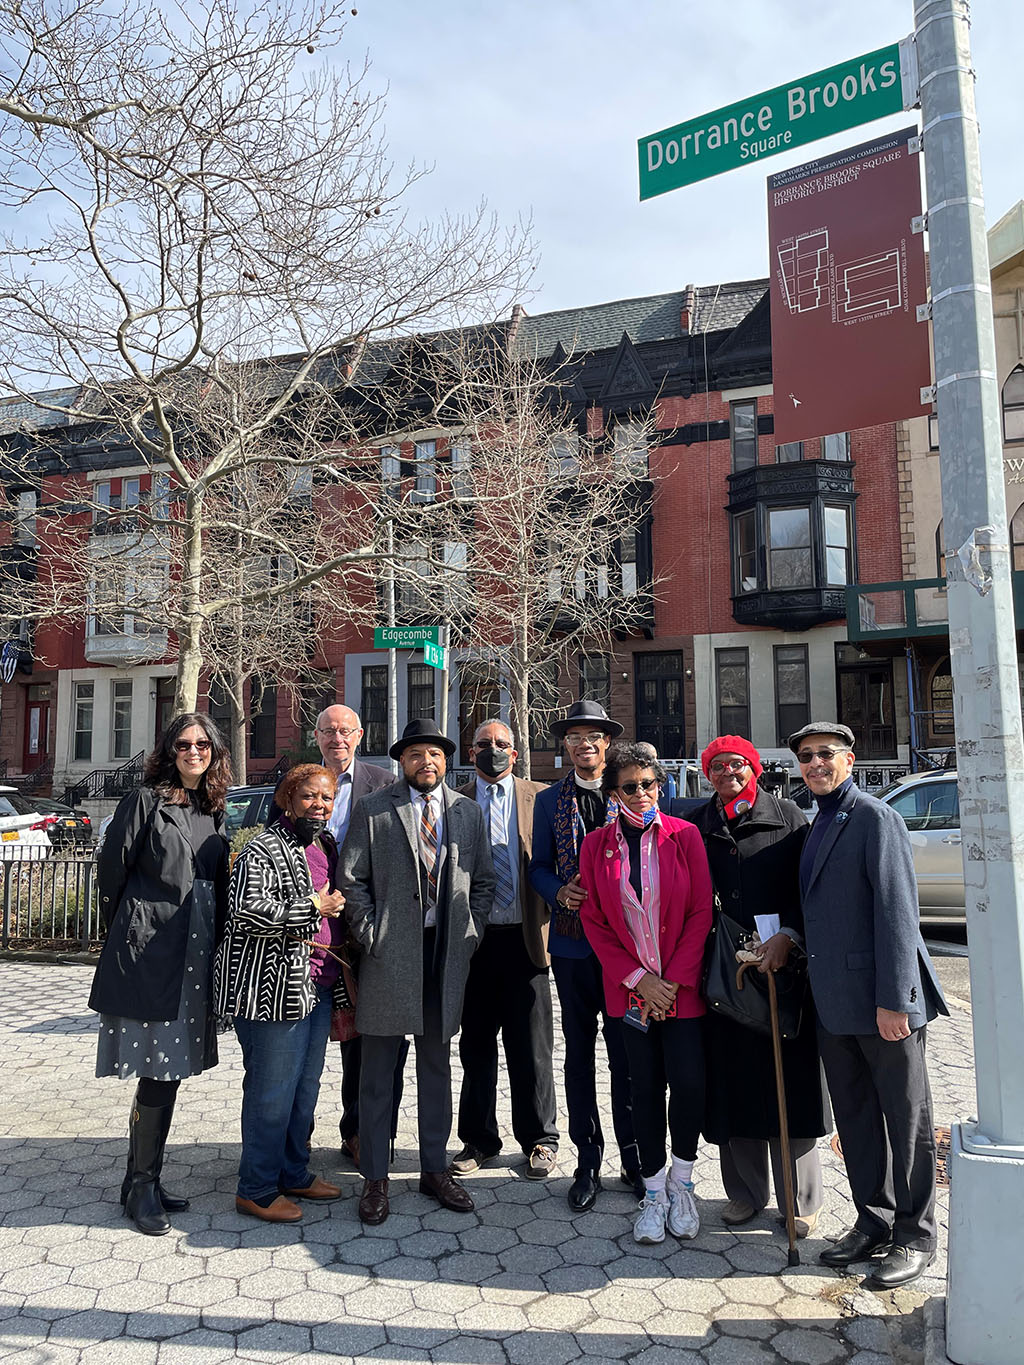 A group of people standing next to the Dorrance Brooks Sq Marker, part of the unveiling. The marker is a green nyc street sign with white text, Dorrance Brooks Square. Underneath the street sign is a marker sign that is burgundy, with with text and a outline of the square. 